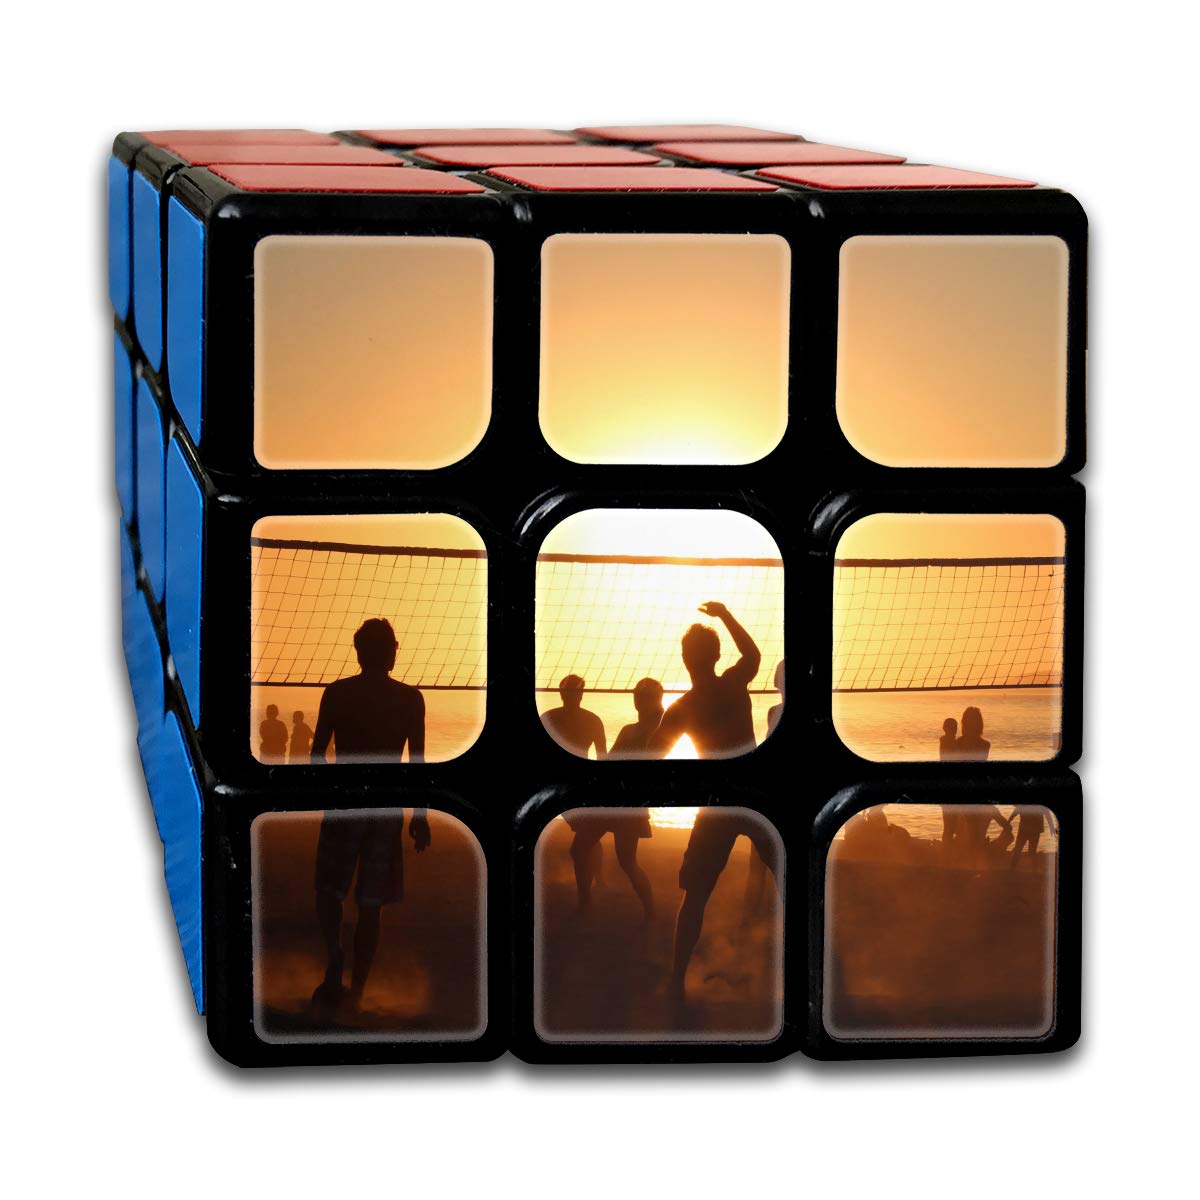 Rubiks Cube By Daiyu Volleyball Wallpaper Smooth Magic - Thank You Rubik's Cube , HD Wallpaper & Backgrounds